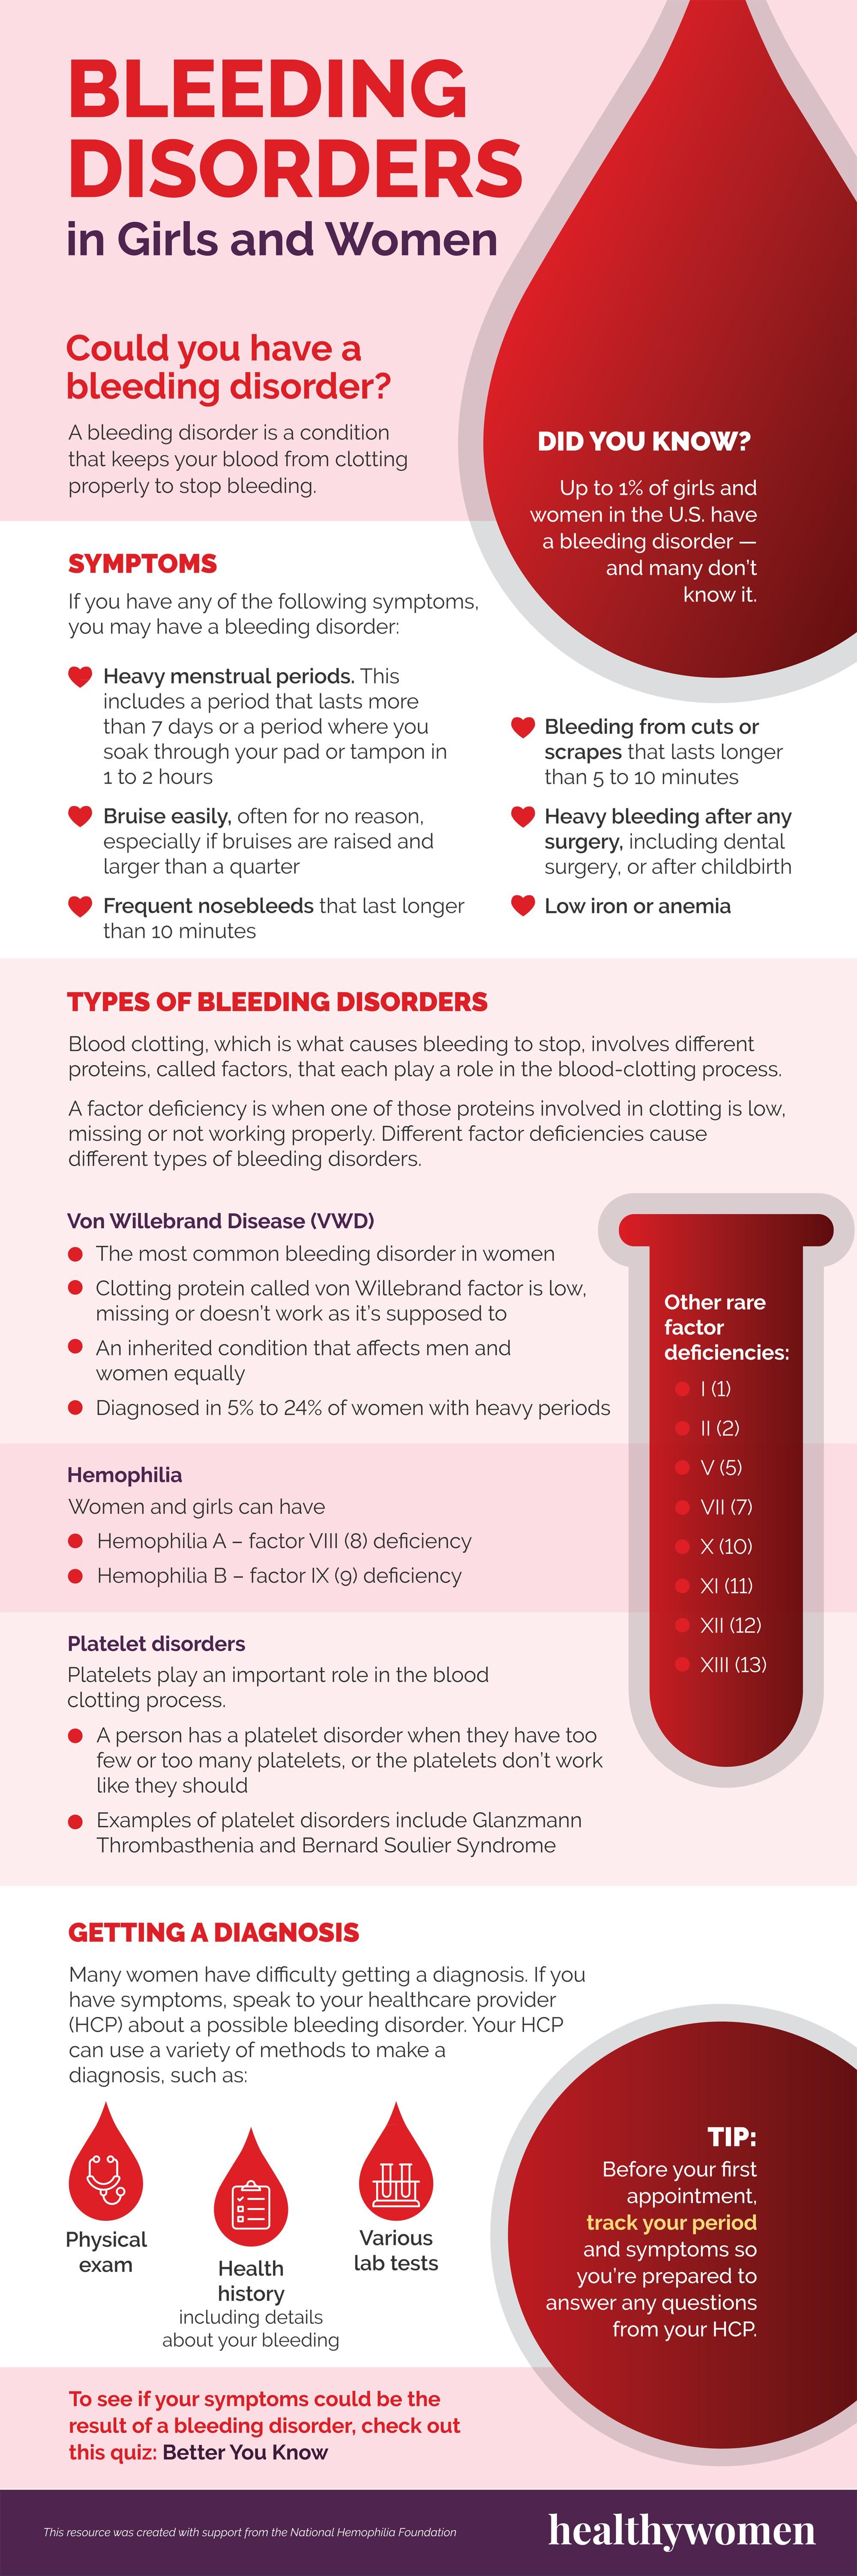 infographic on bleeding disorders. Click the image to open the pdf 